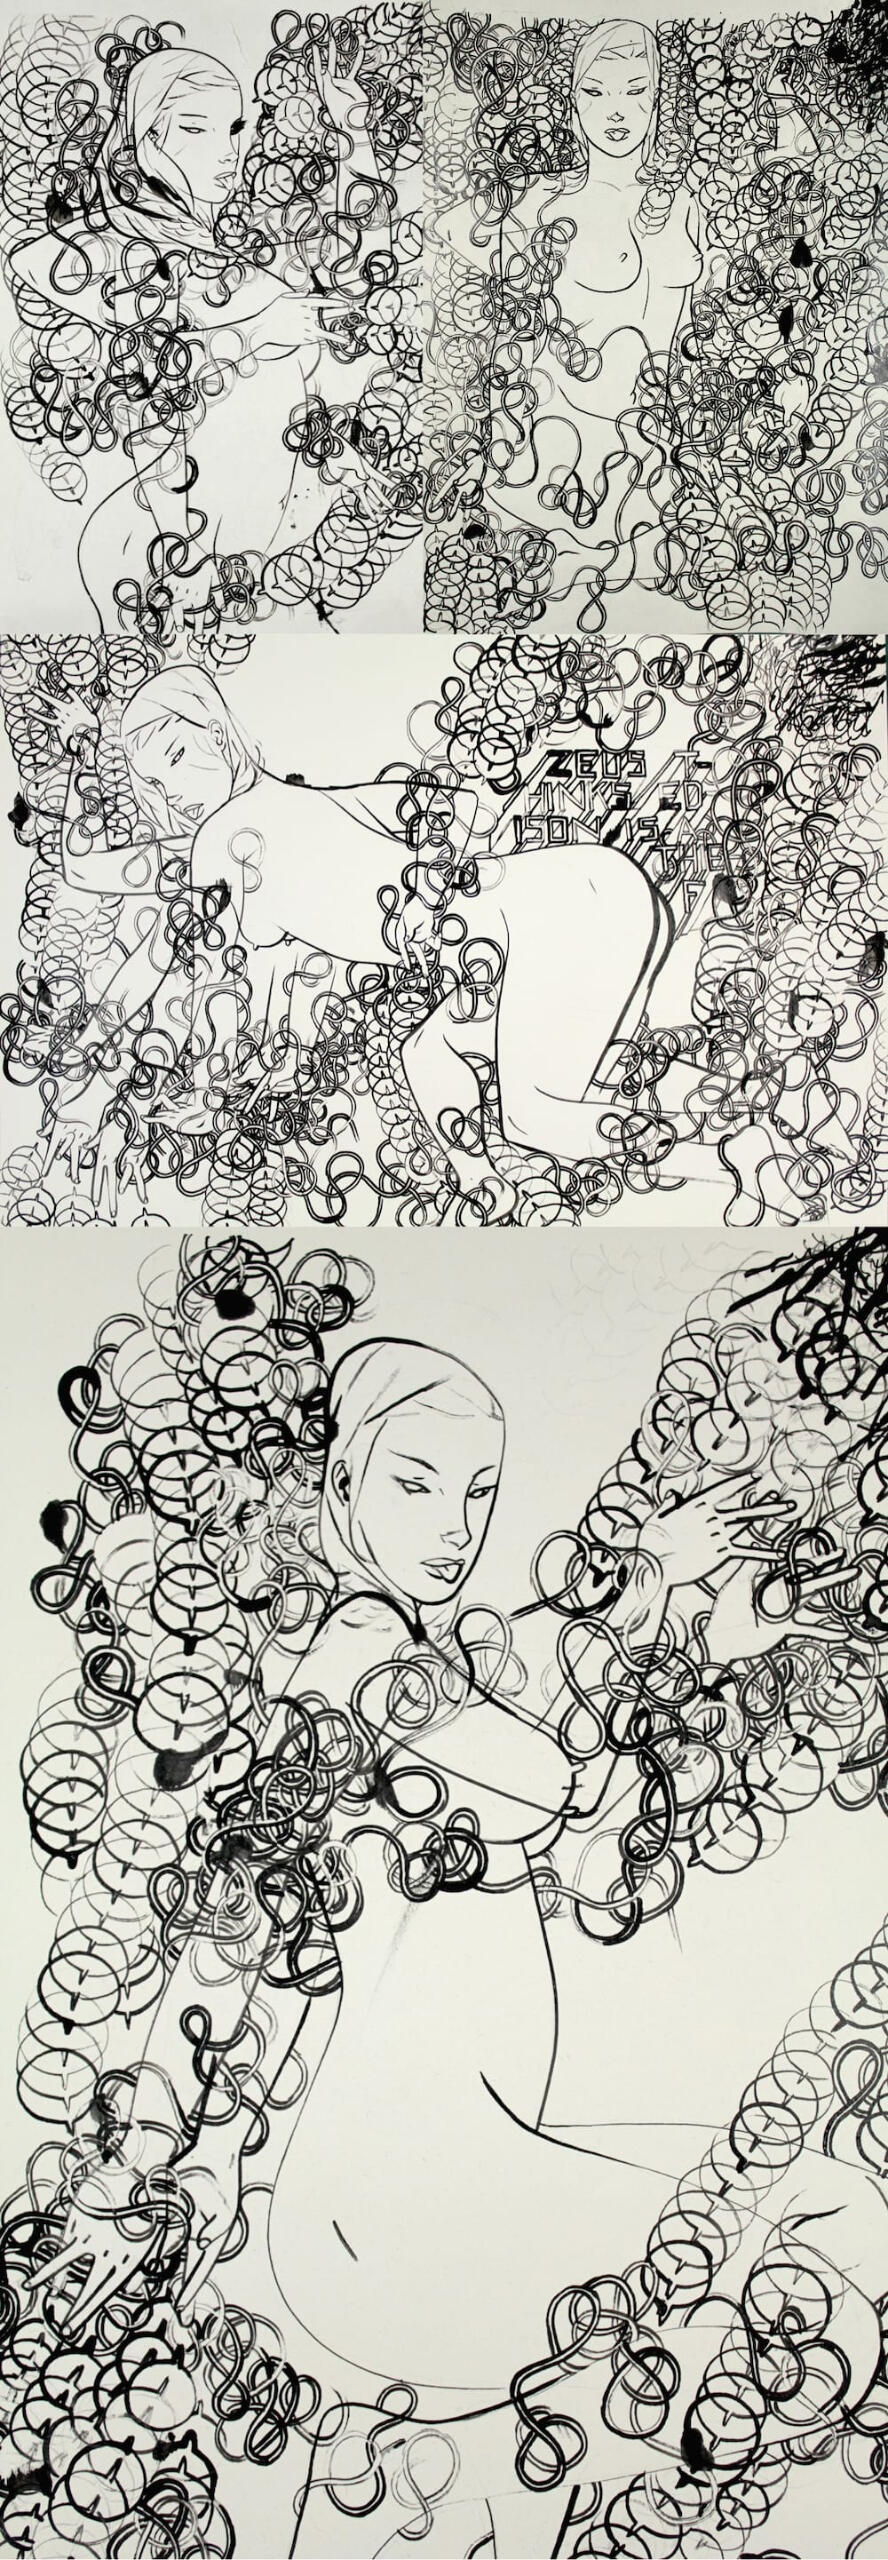 Chaos Nudes - Ink on Paper (Selected Drawings)